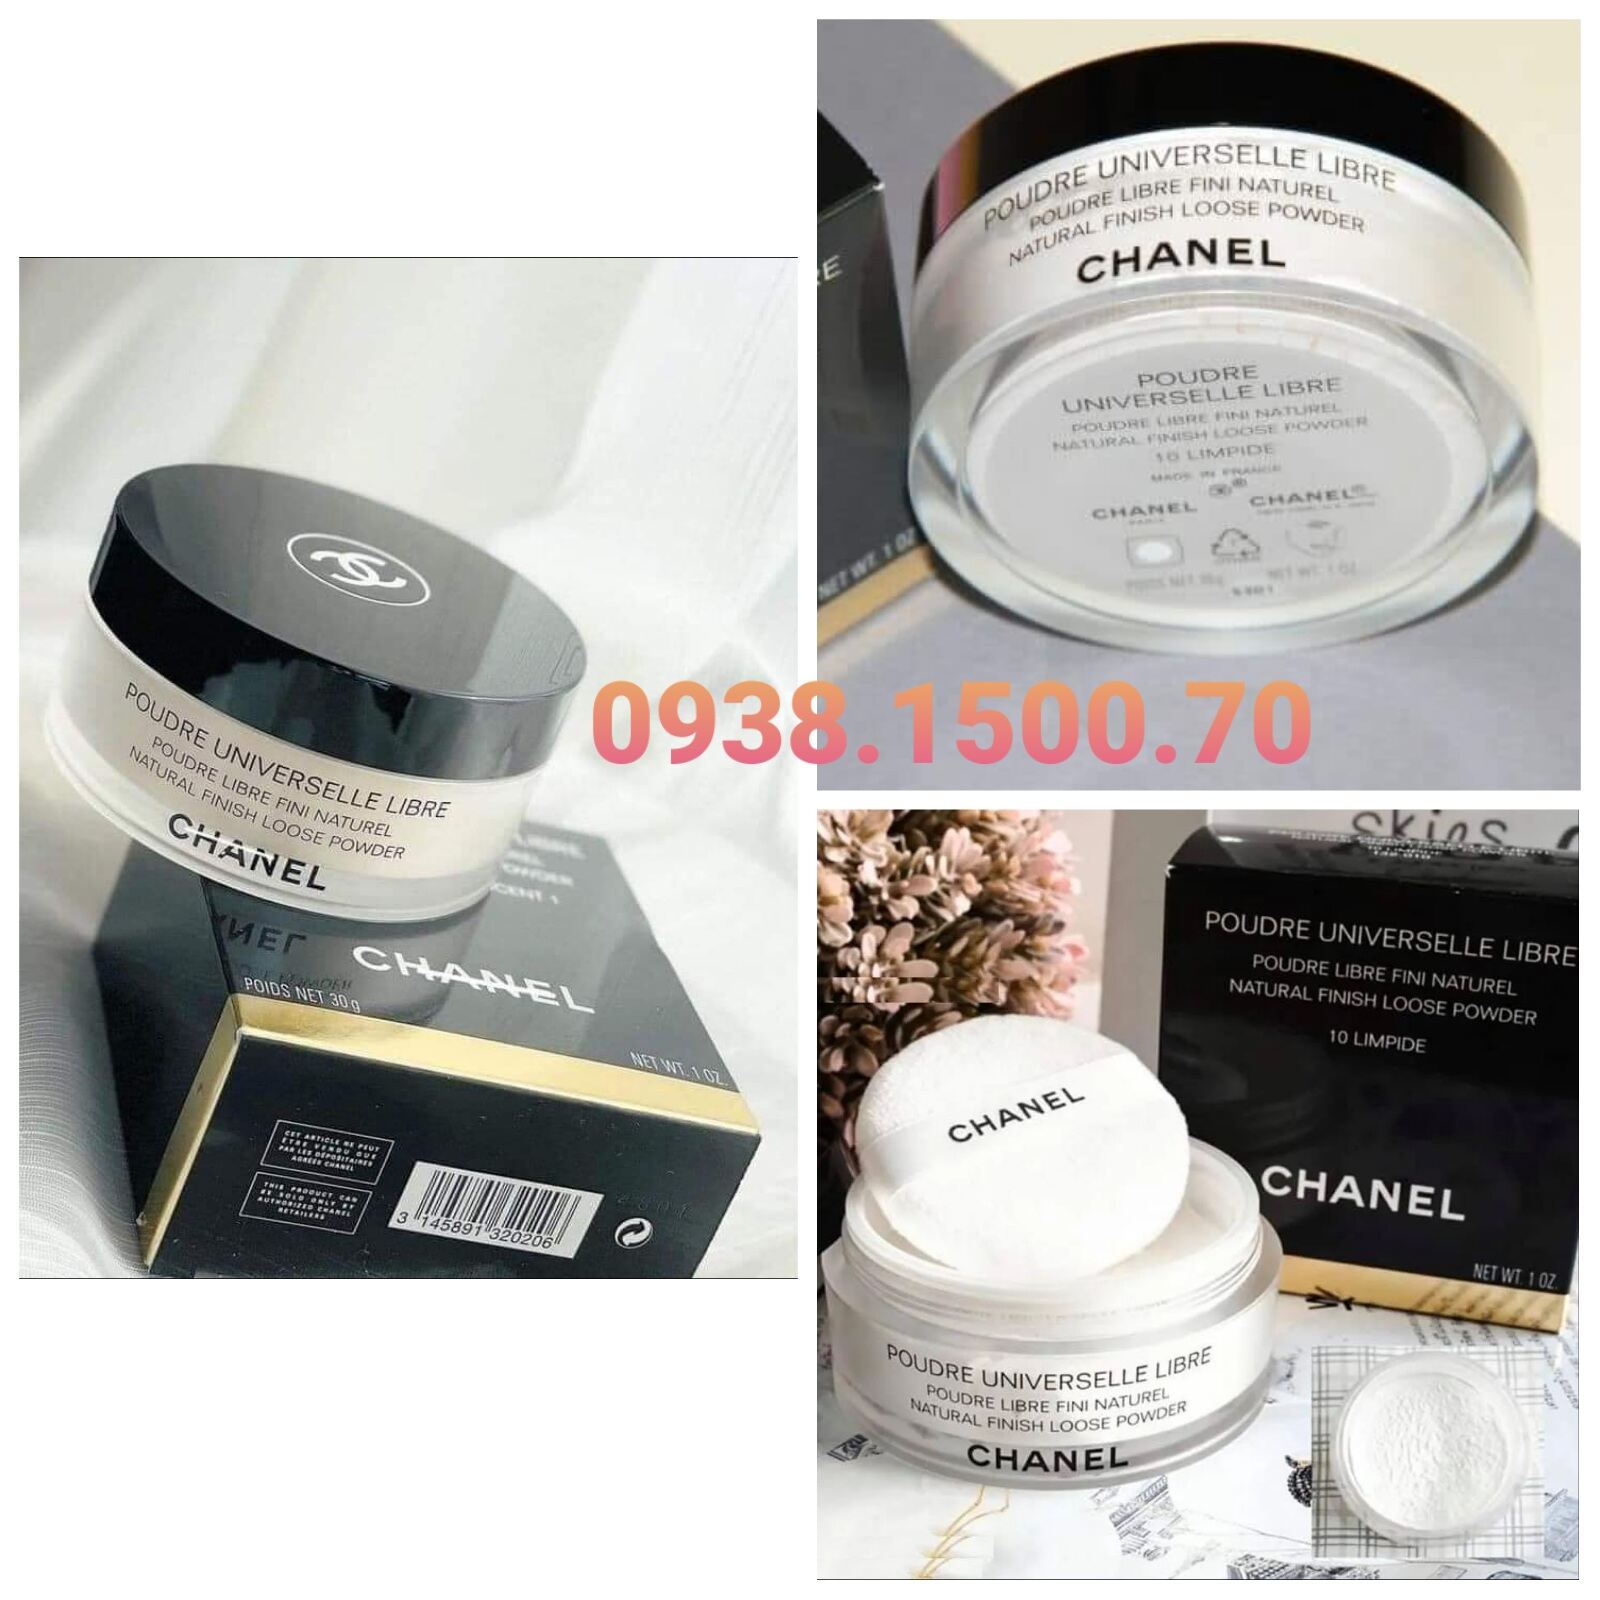 CHANEL Poudre Universelle Libre Natural Finish Loose Powder  Reviews   MakeupAlley